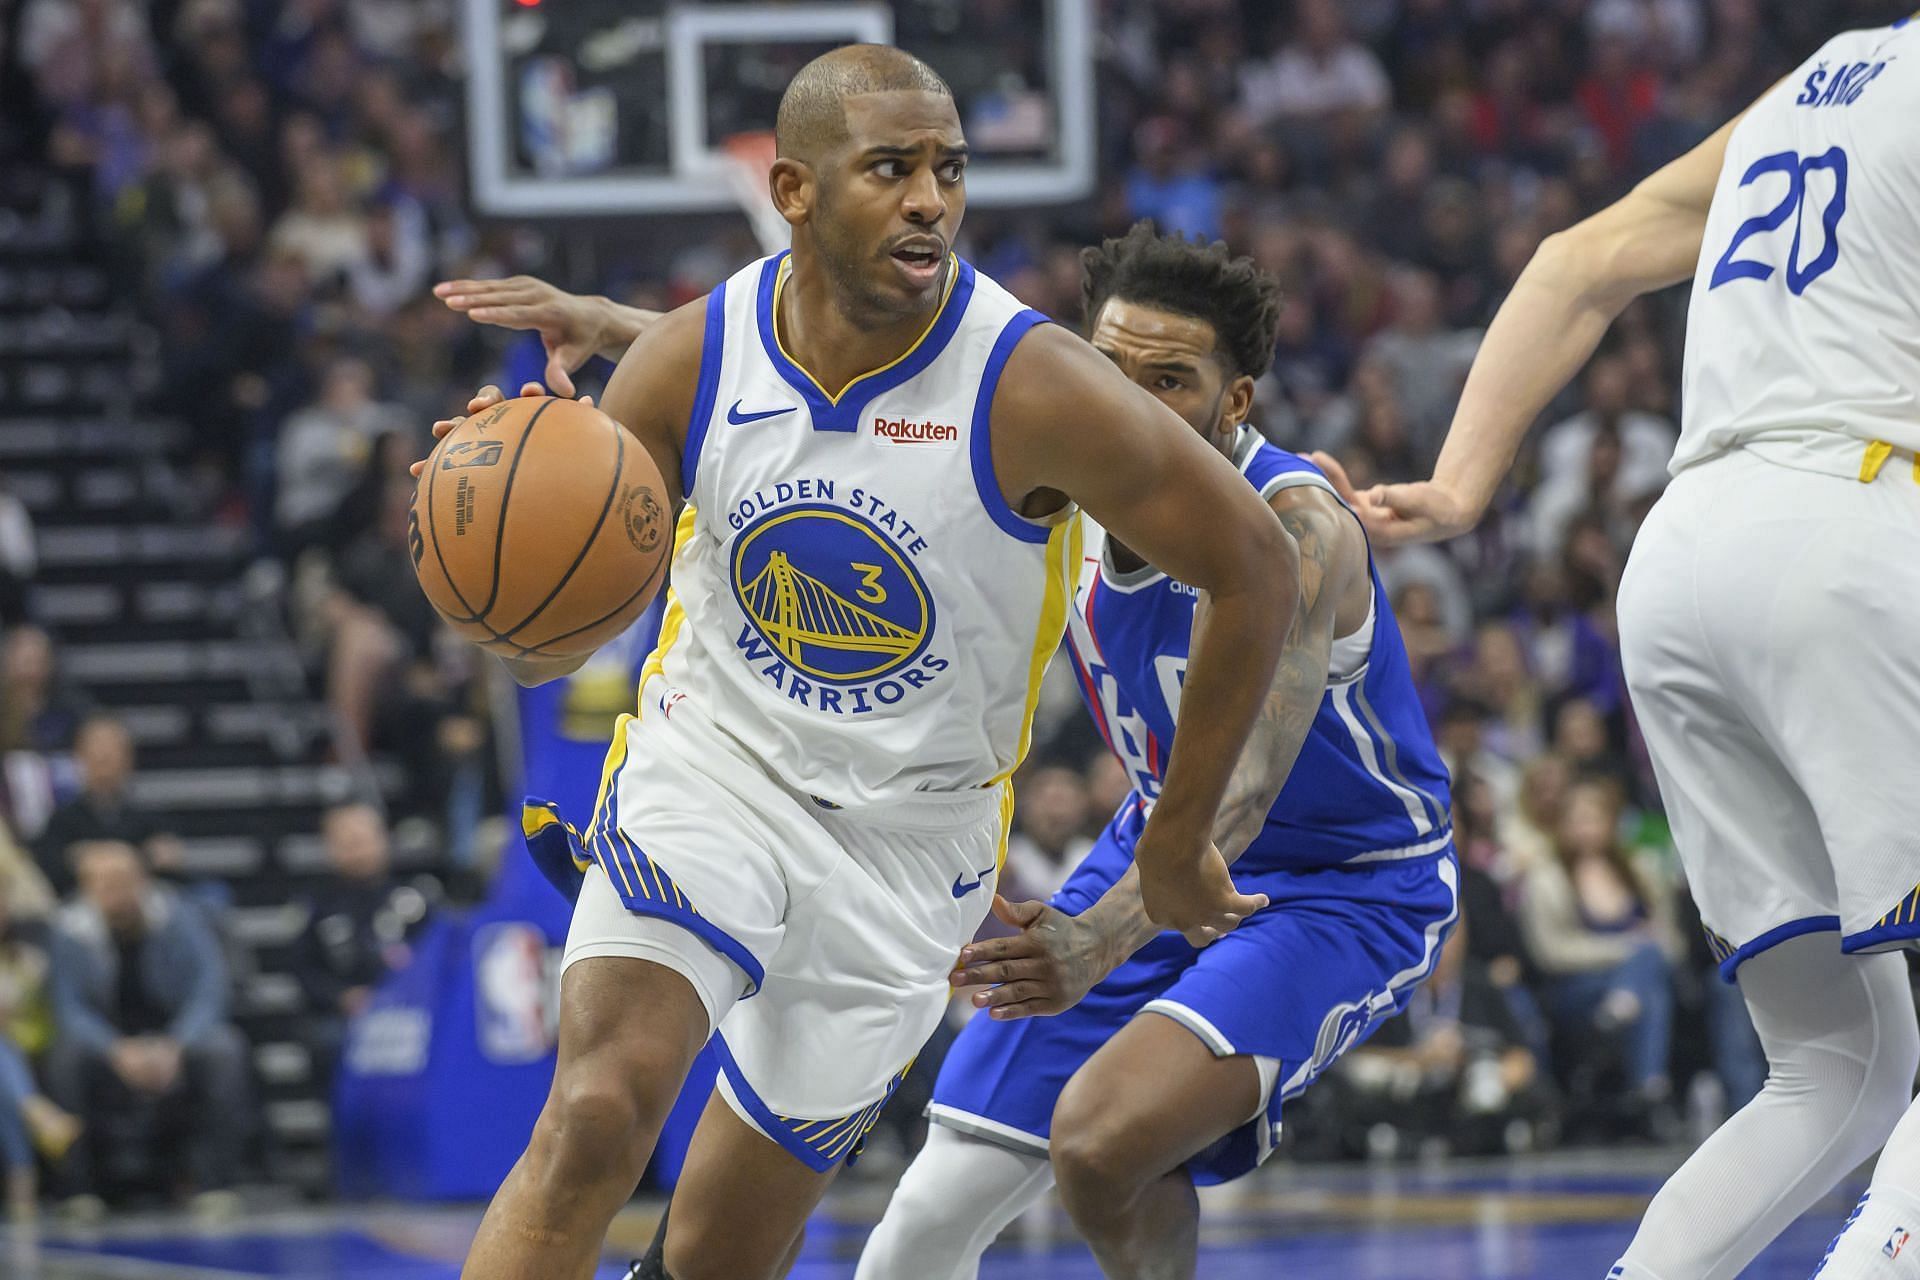 Chris Paul reflects on what could have been had LA Lakers trade been approved